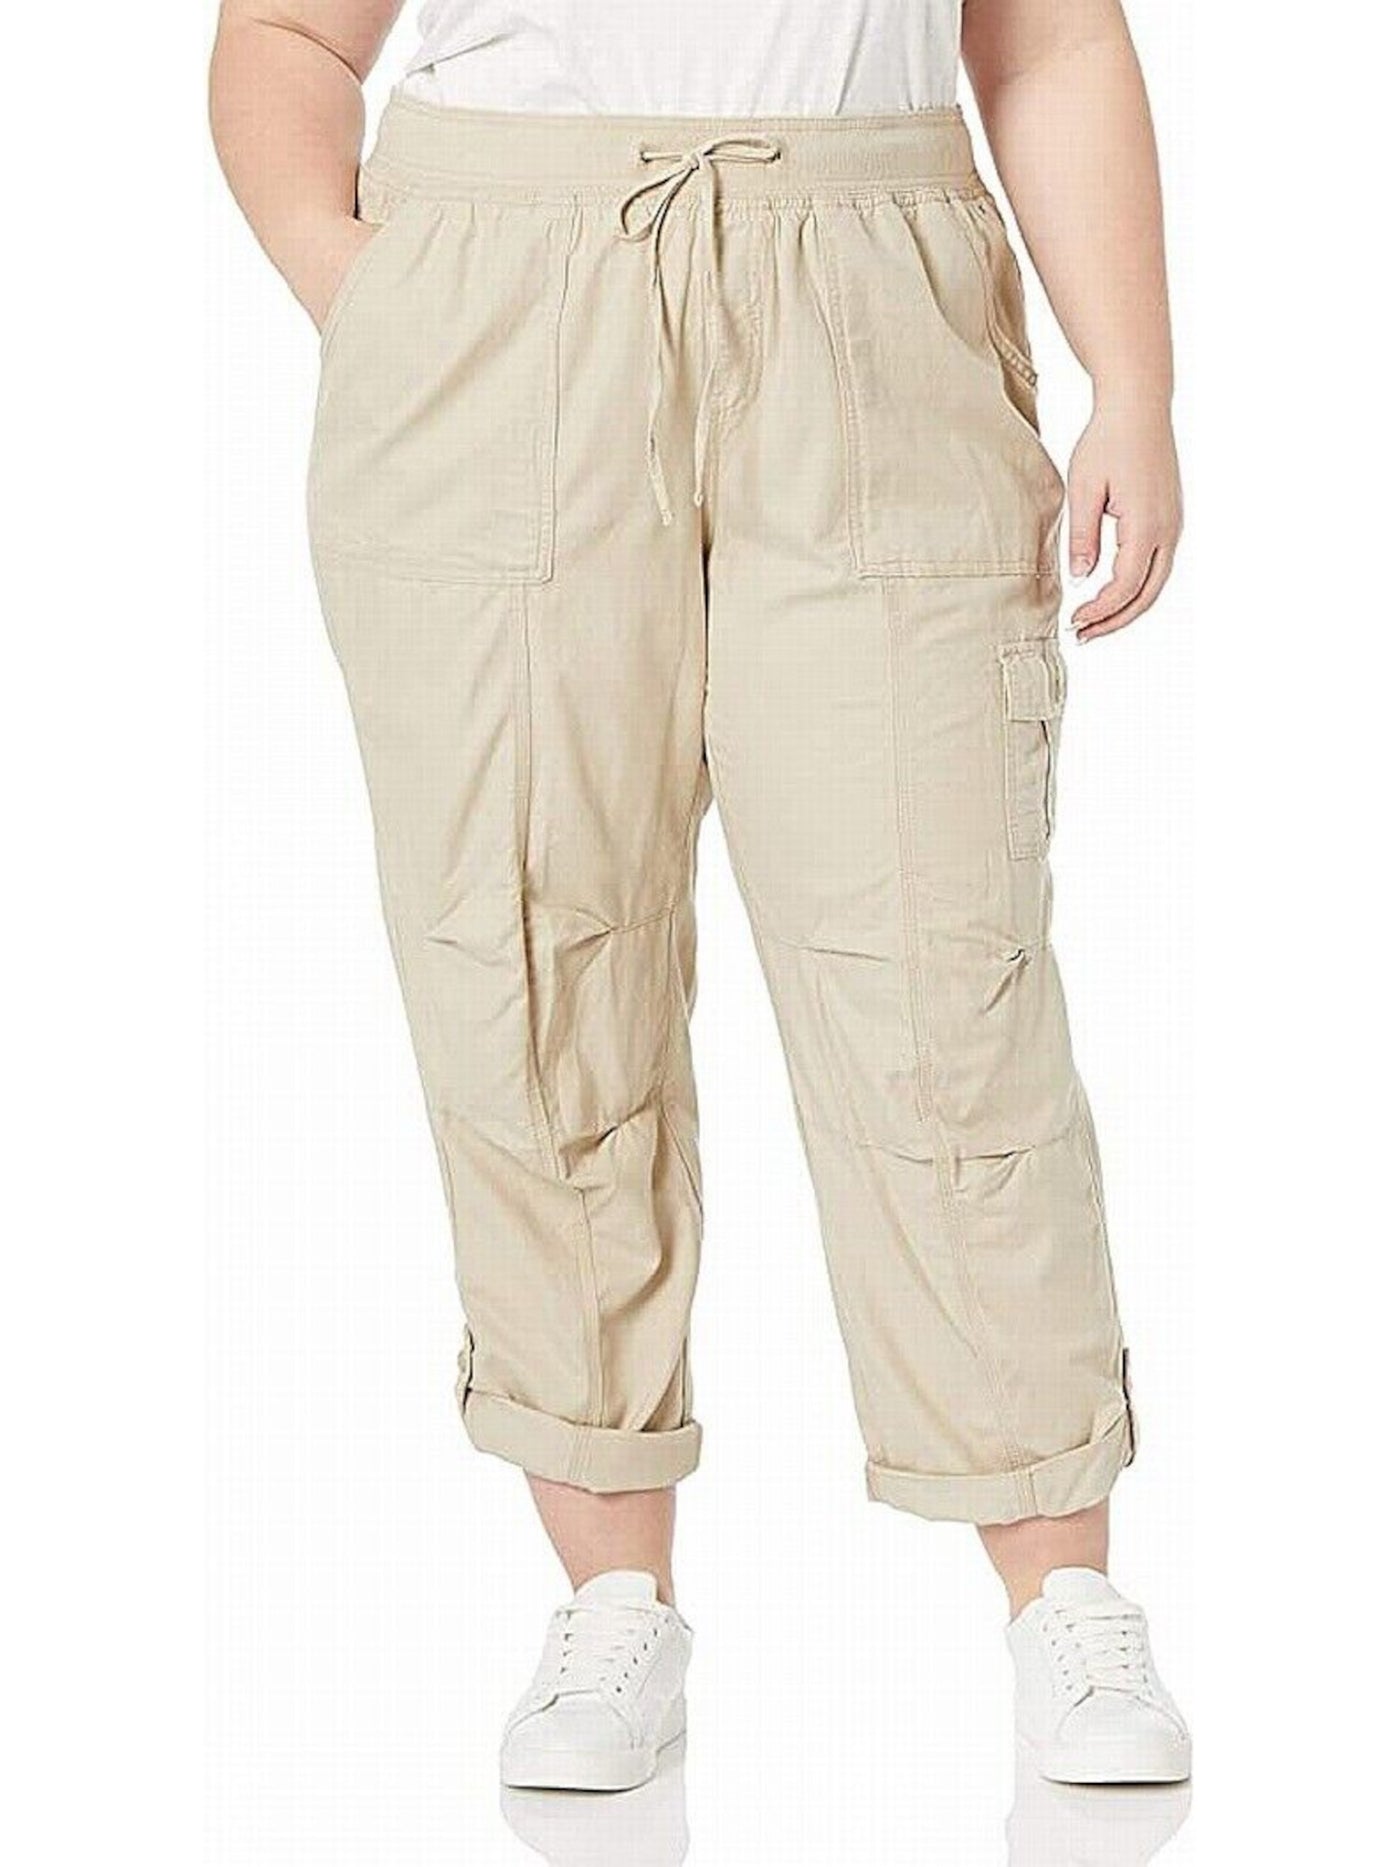 TOMMY HILFIGER Womens Beige Pocketed Mid-rise Drawstring Straight Leg Cargo Pants Plus 0X